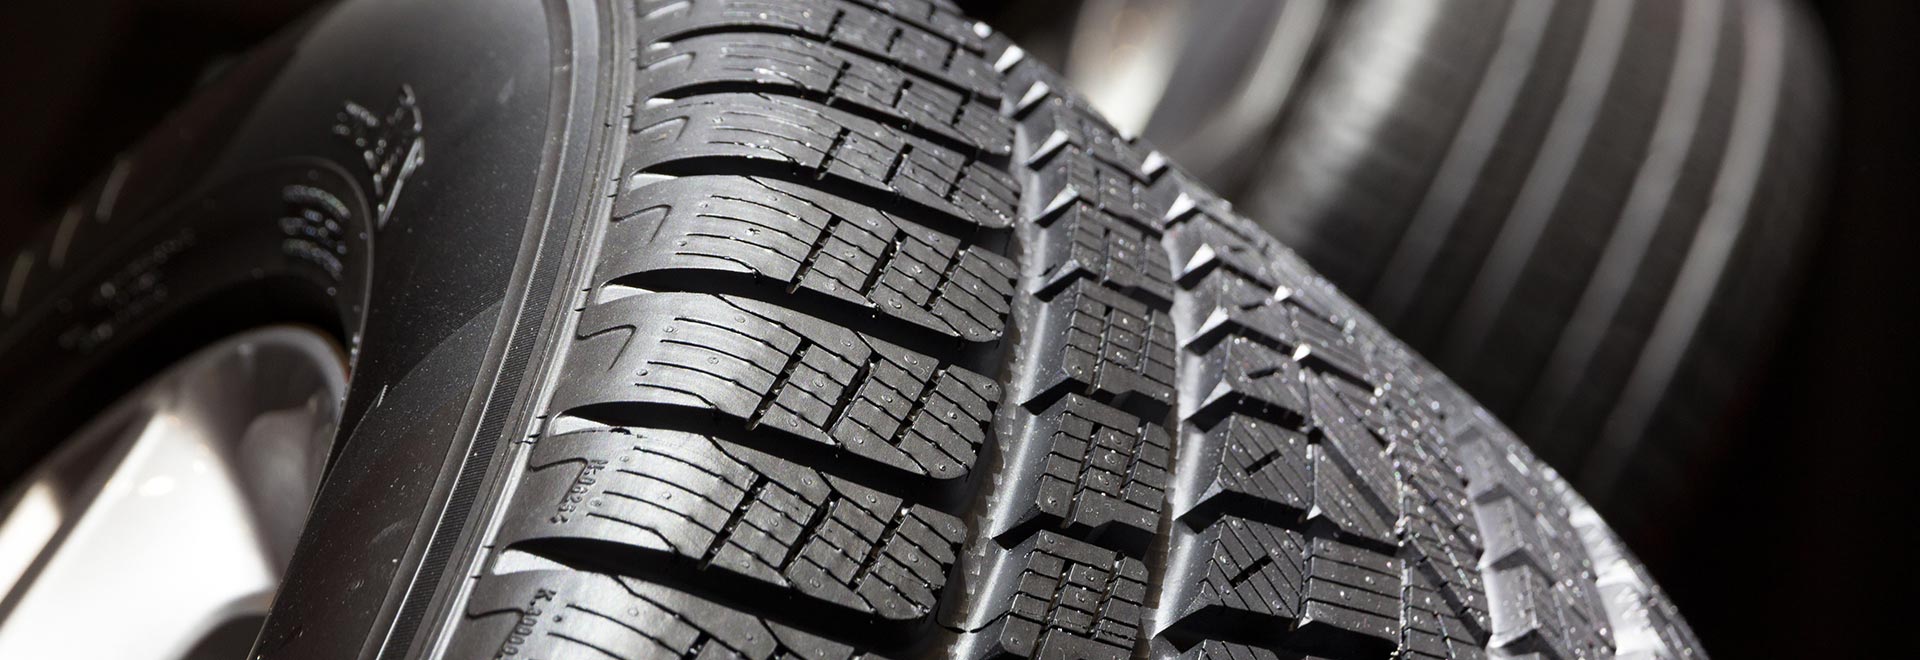 Find Top Rated Tire Brands